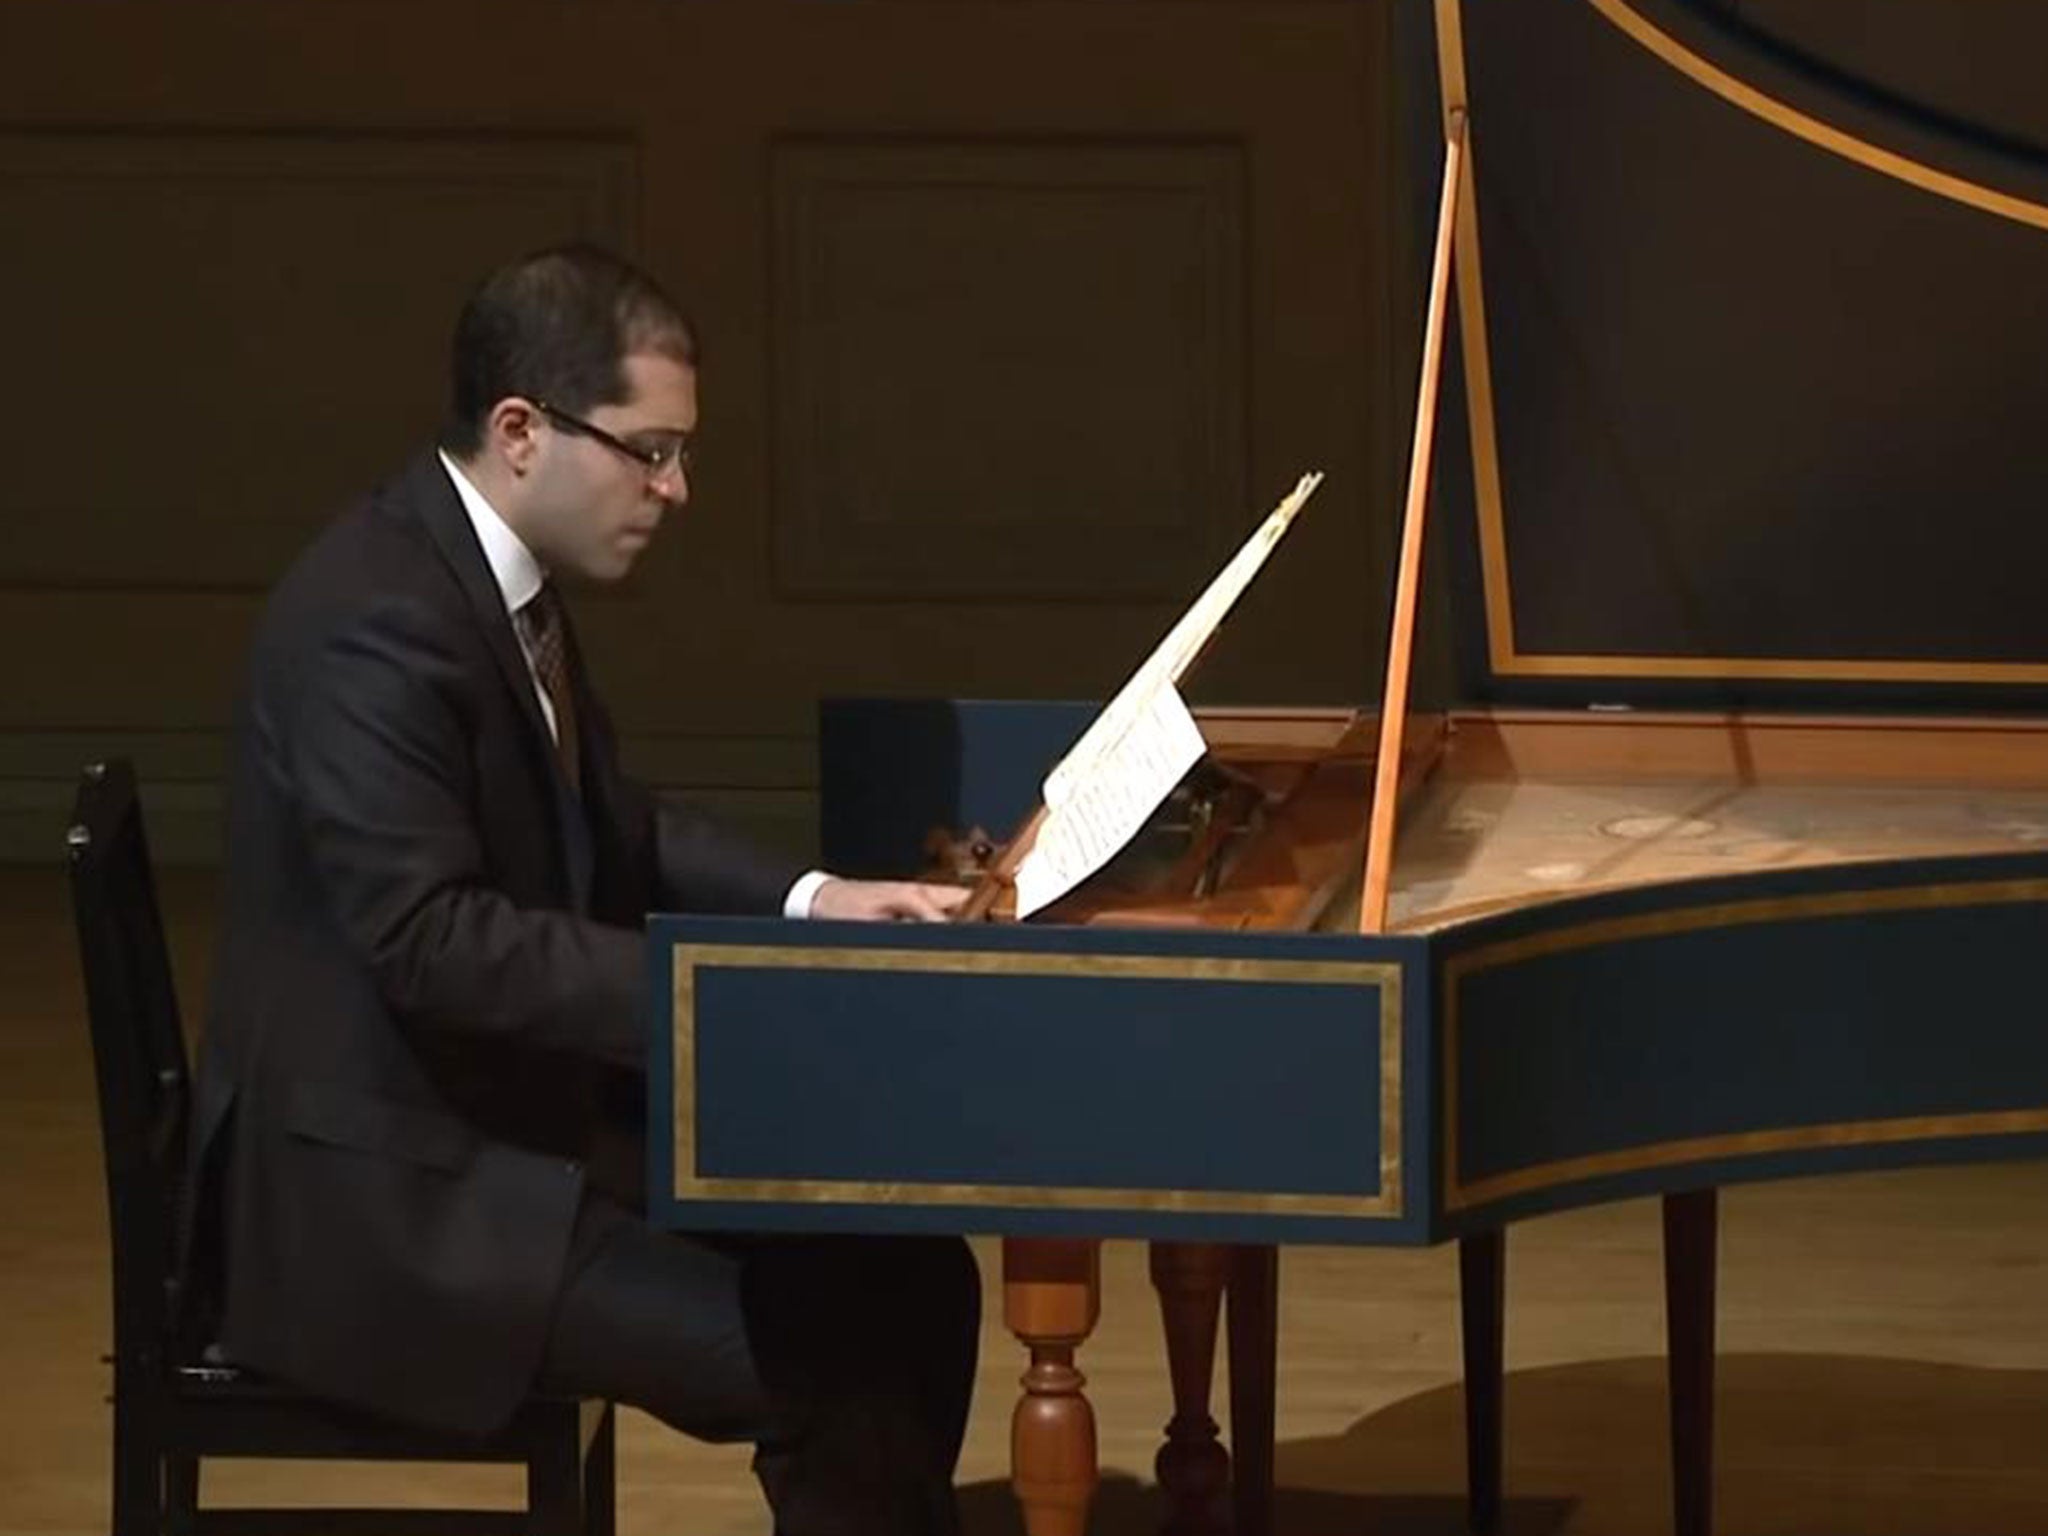 Mahan Esfahani was forced to pause his concert